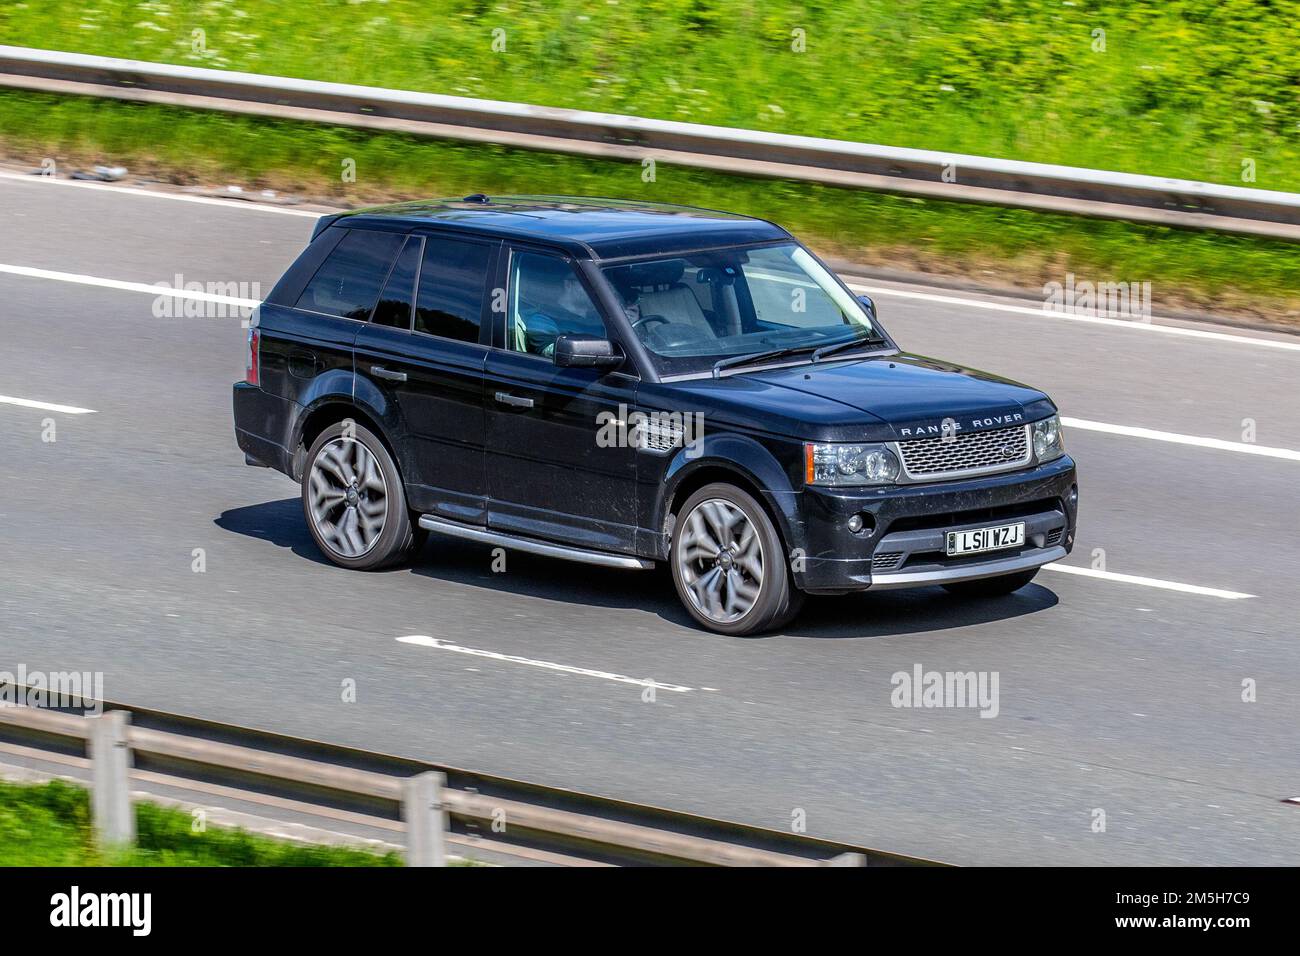 2011 Black LAND ROVER, RANGE ROVER Sport TDVS AUTOBIOGRAPHY 2993cc Diesel 6 speed automatic, 3.0-litre twin-turbo TDV6 ; travelling on the M6 Motorway UK Stock Photo